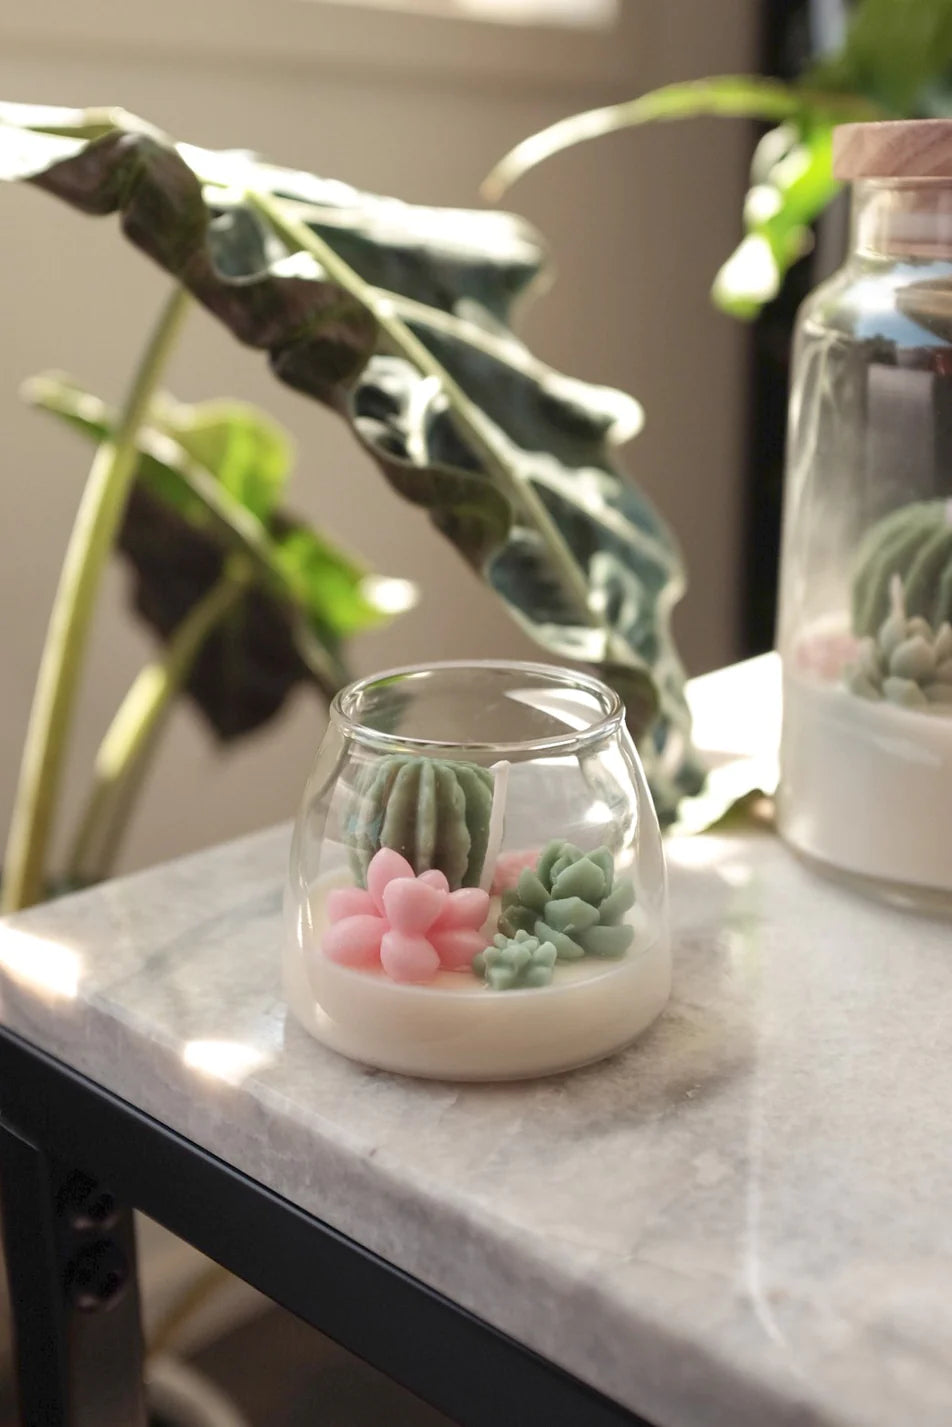 A serene corner with a Judean Desert Mini Terrarium Candle showcasing a selection of delicate succulents and a vibrant pink flower, all bathed in the soft glow of natural light beside the elegant greens of a larger Faith & Joy candle.